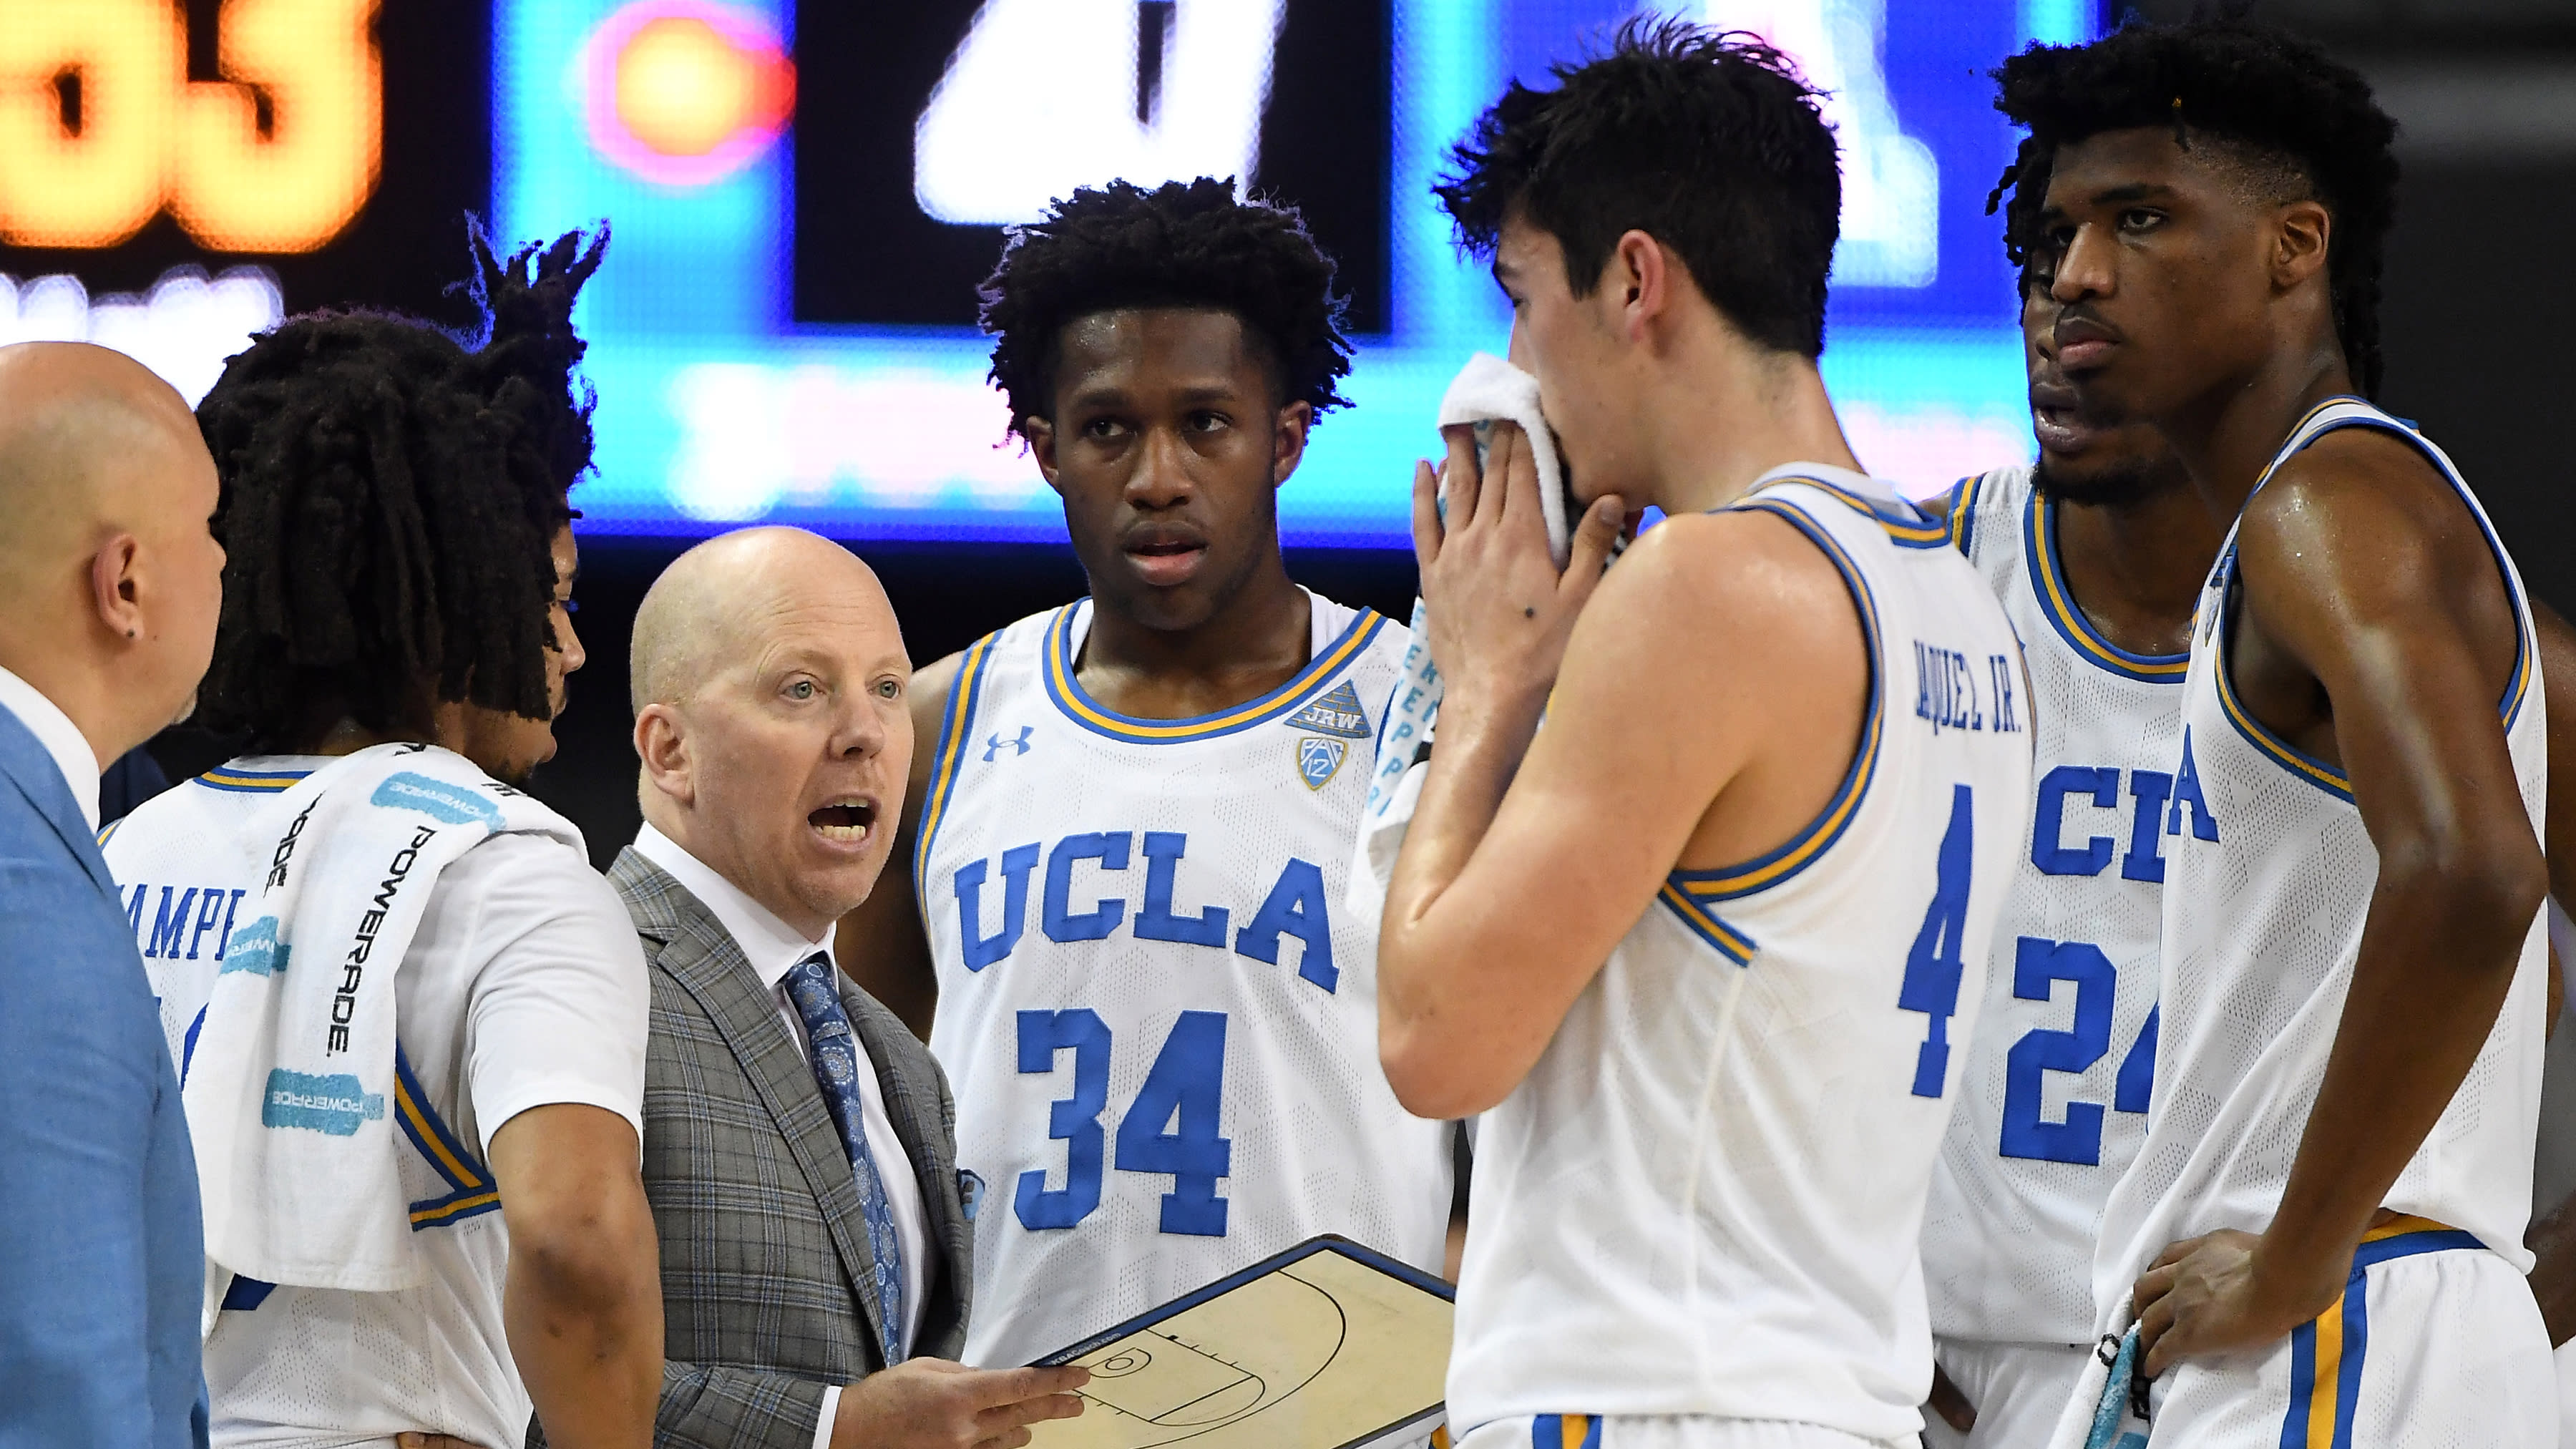 Teams to Watch During the 2020-21 College Basketball Season [Video]